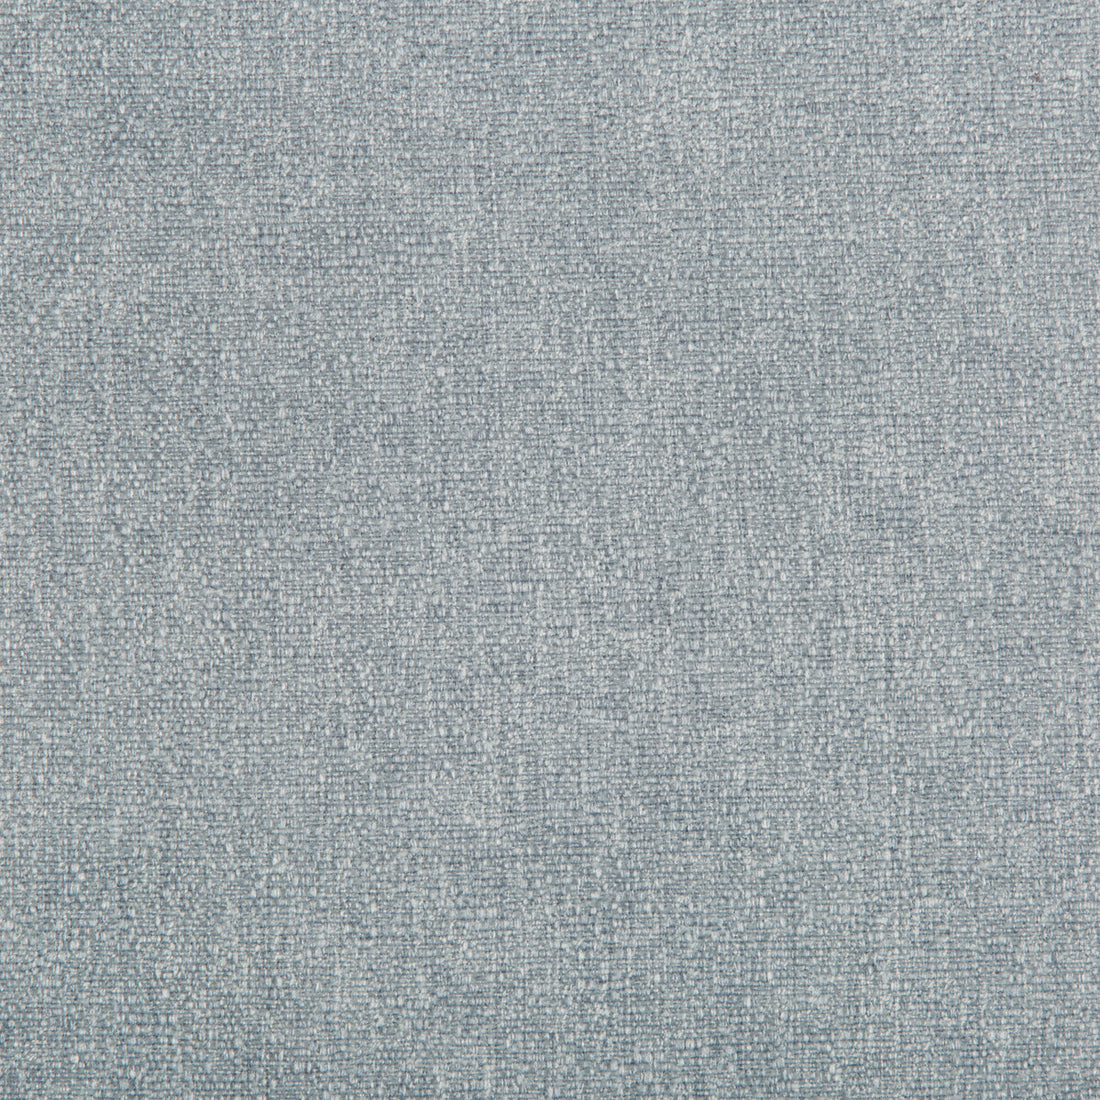 Kravet Contract fabric in 35405-15 color - pattern 35405.15.0 - by Kravet Contract in the Crypton Incase collection